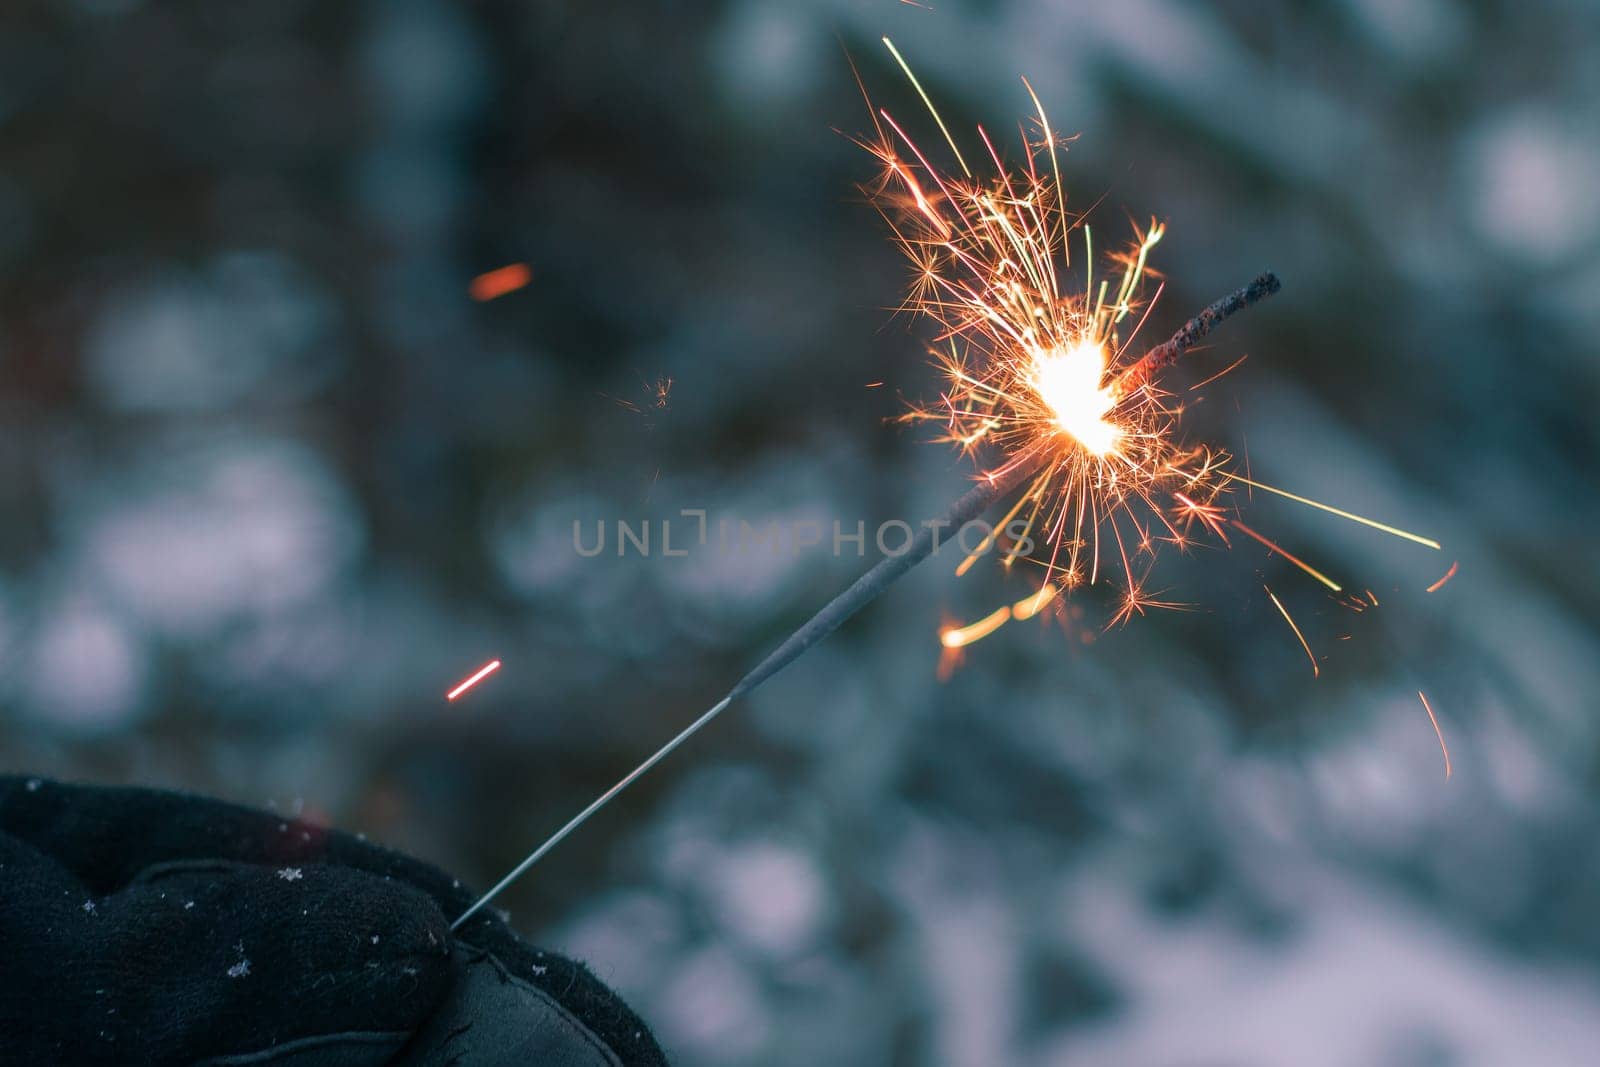 Burning Sparklers in a Hand Outdoors in Winter in Evening. New Year Celebration Party